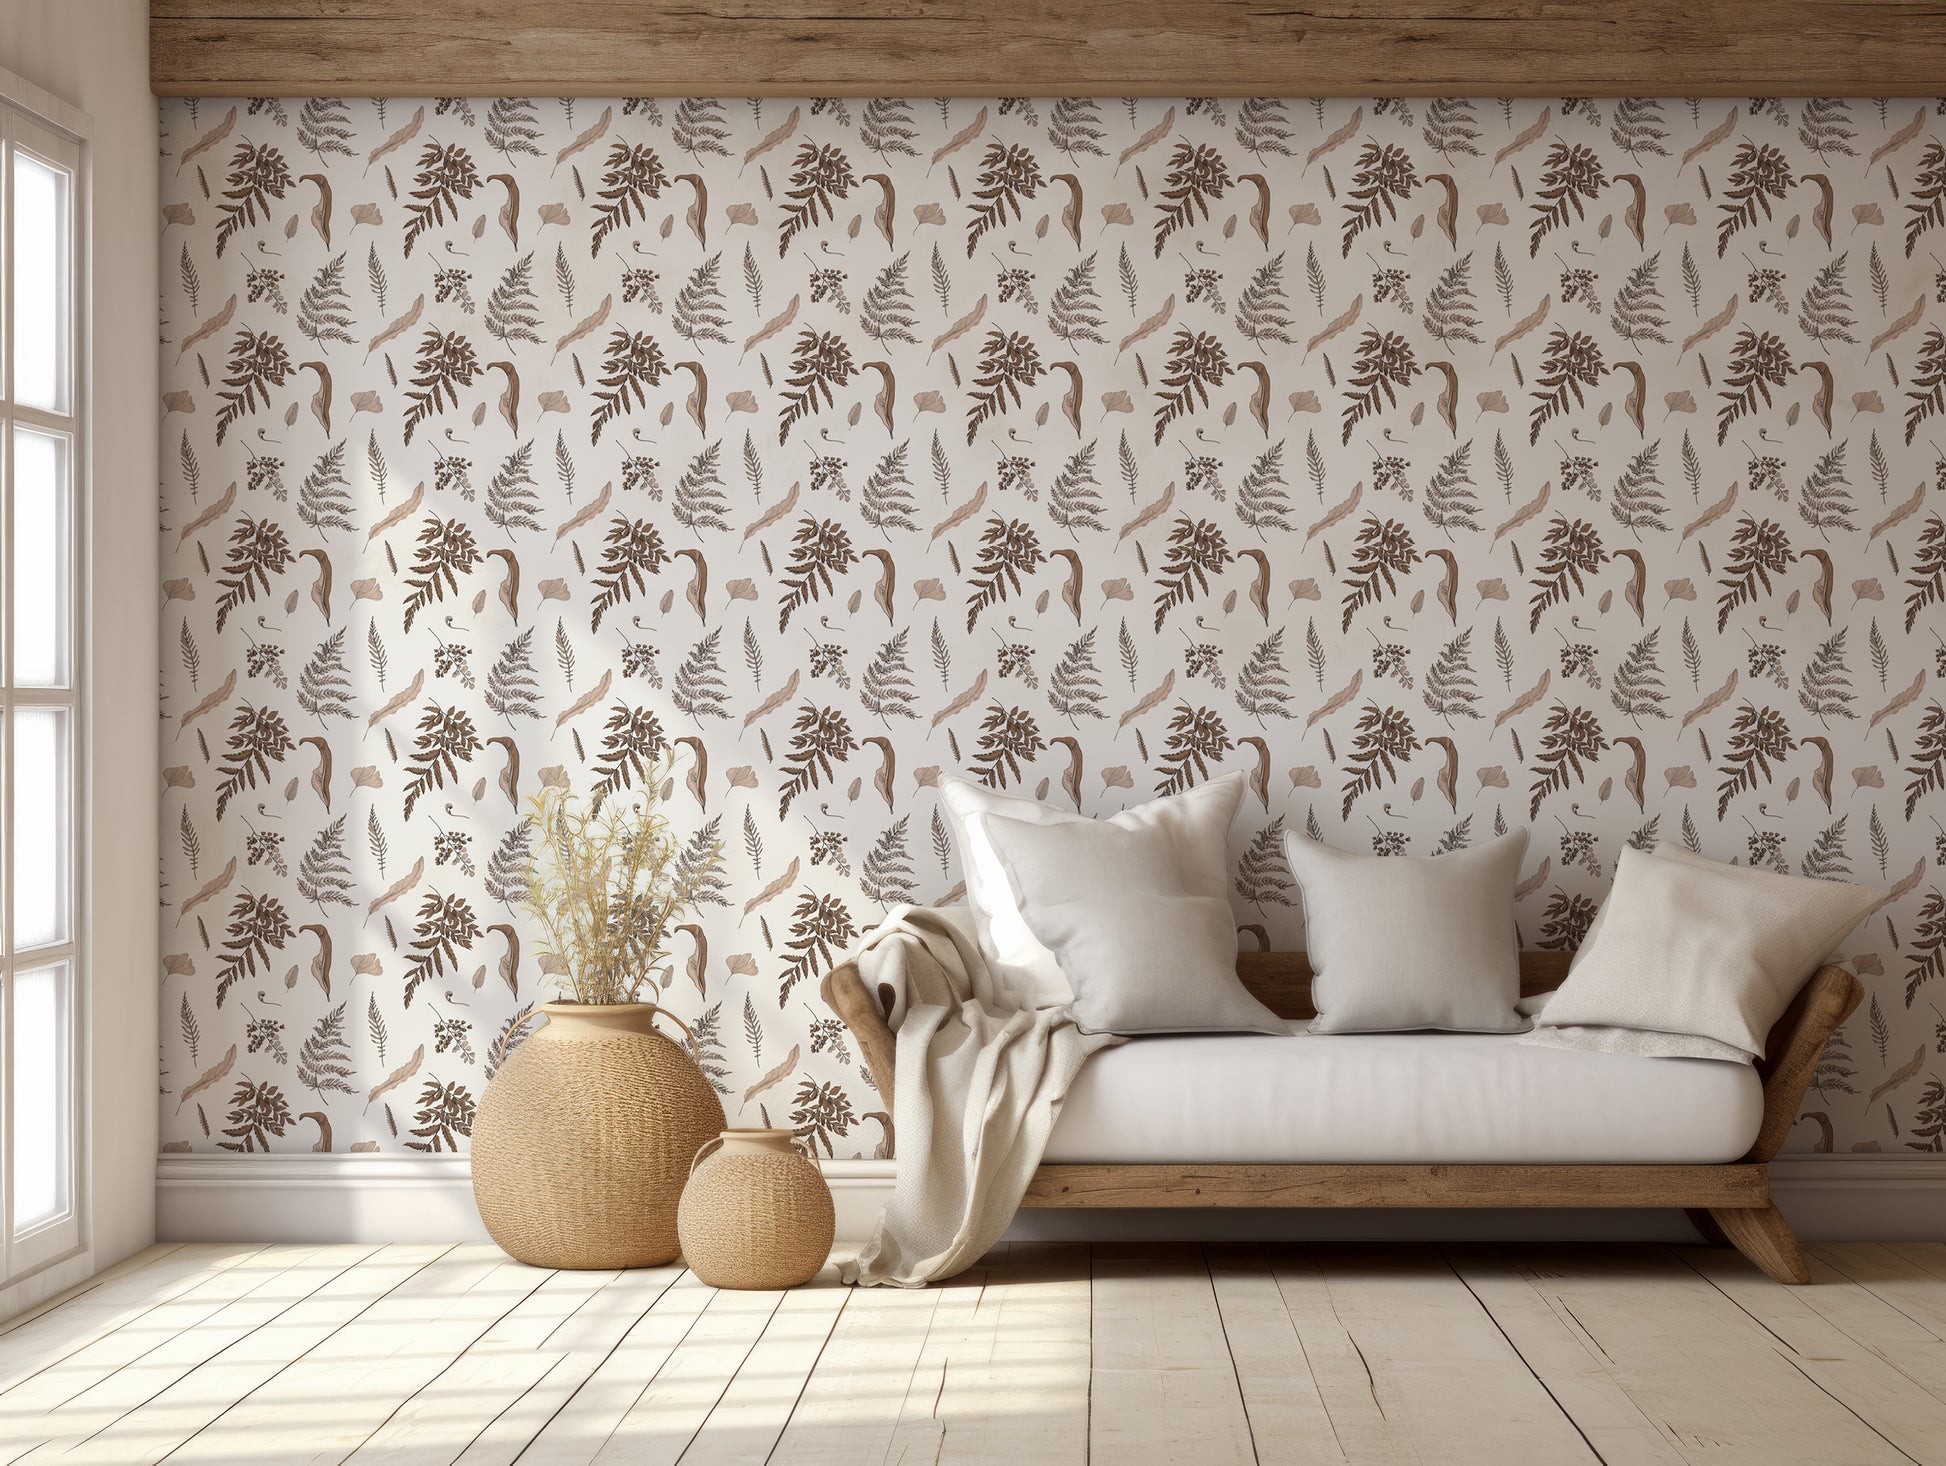 Cordeilia Wallpaper In Living Room WIth Small Farmhouse Sofa With Large Woven Plant Pots And Light Shining Through